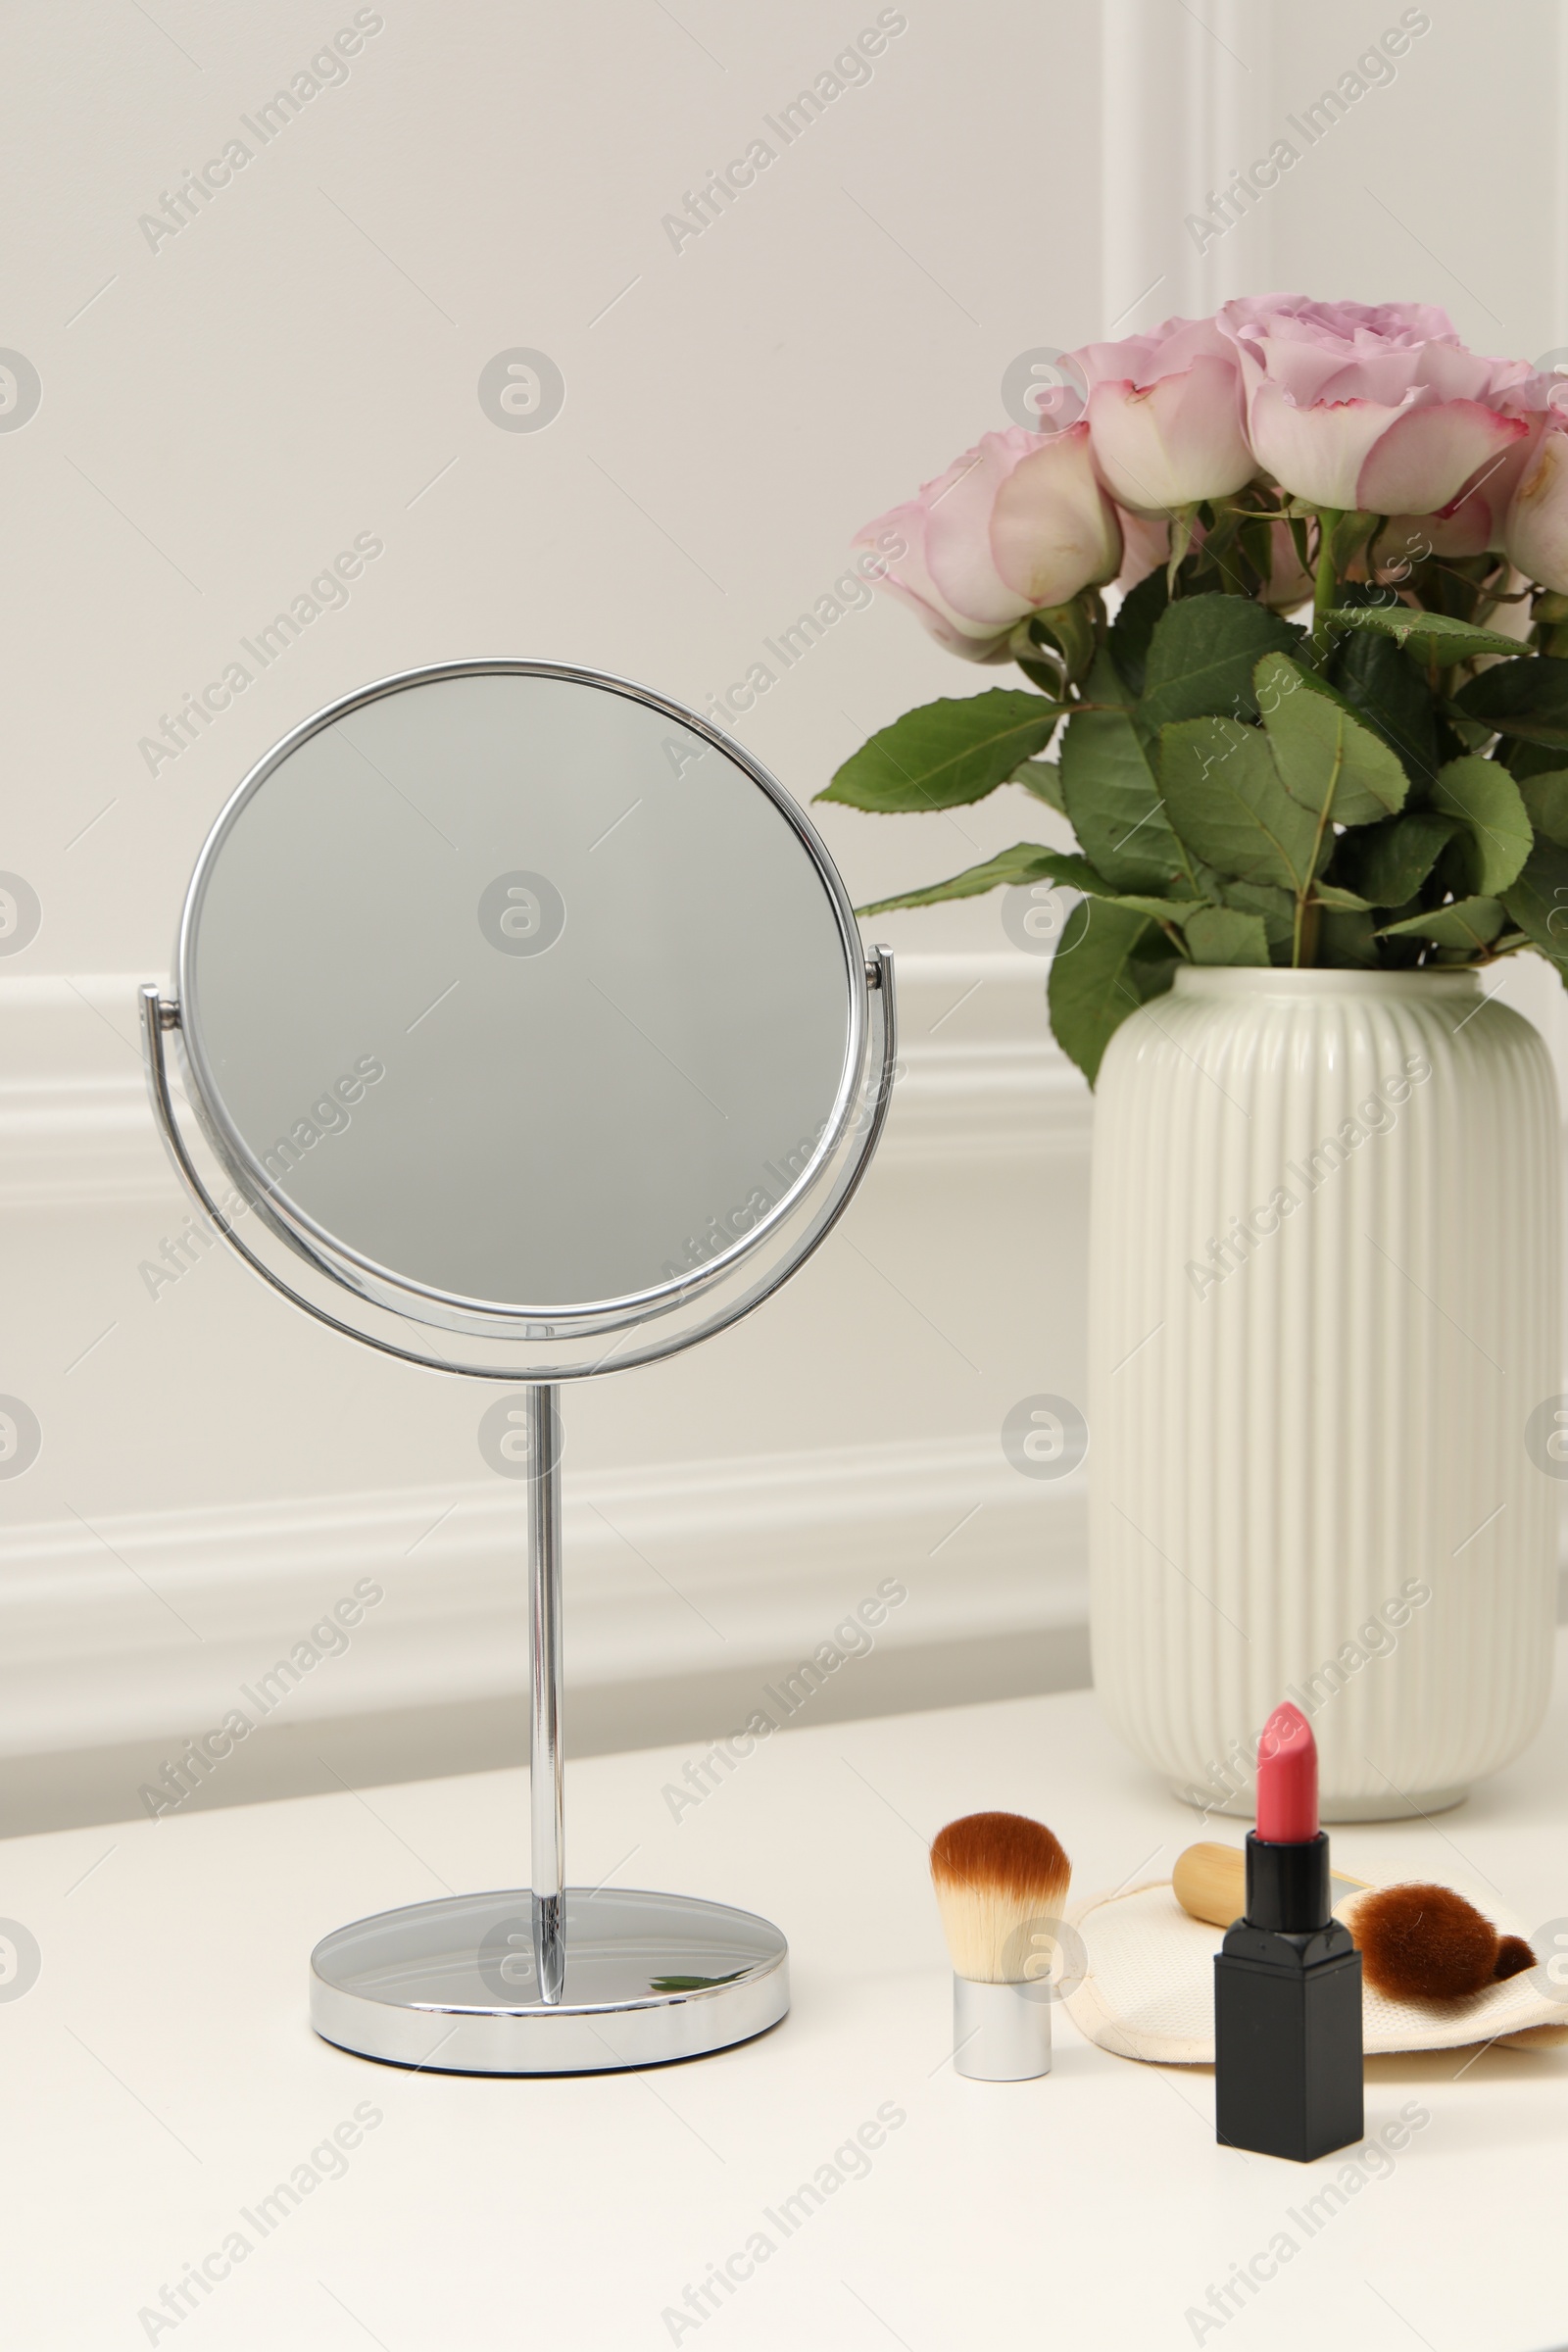 Photo of Mirror, cosmetic products and vase with pink roses on white dressing table